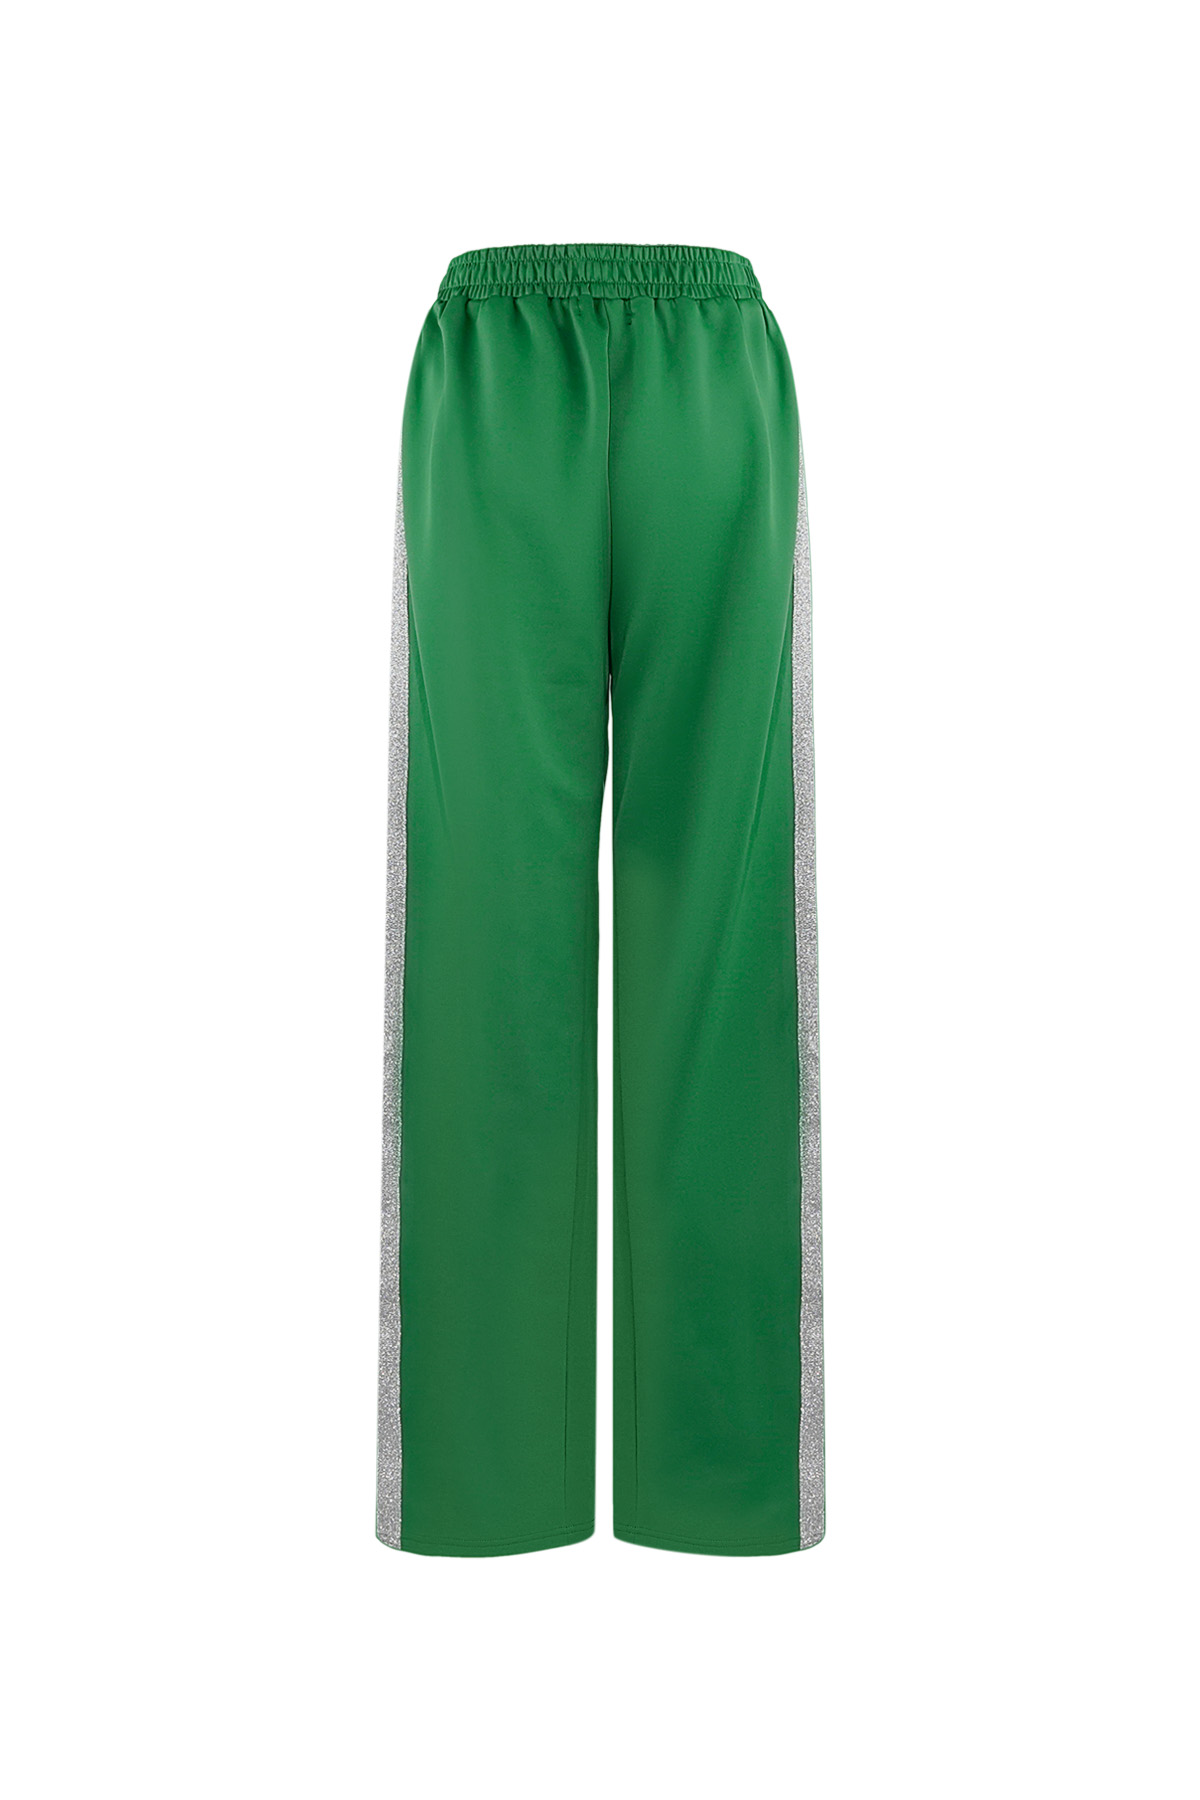 Striped must have pants - green L Picture12